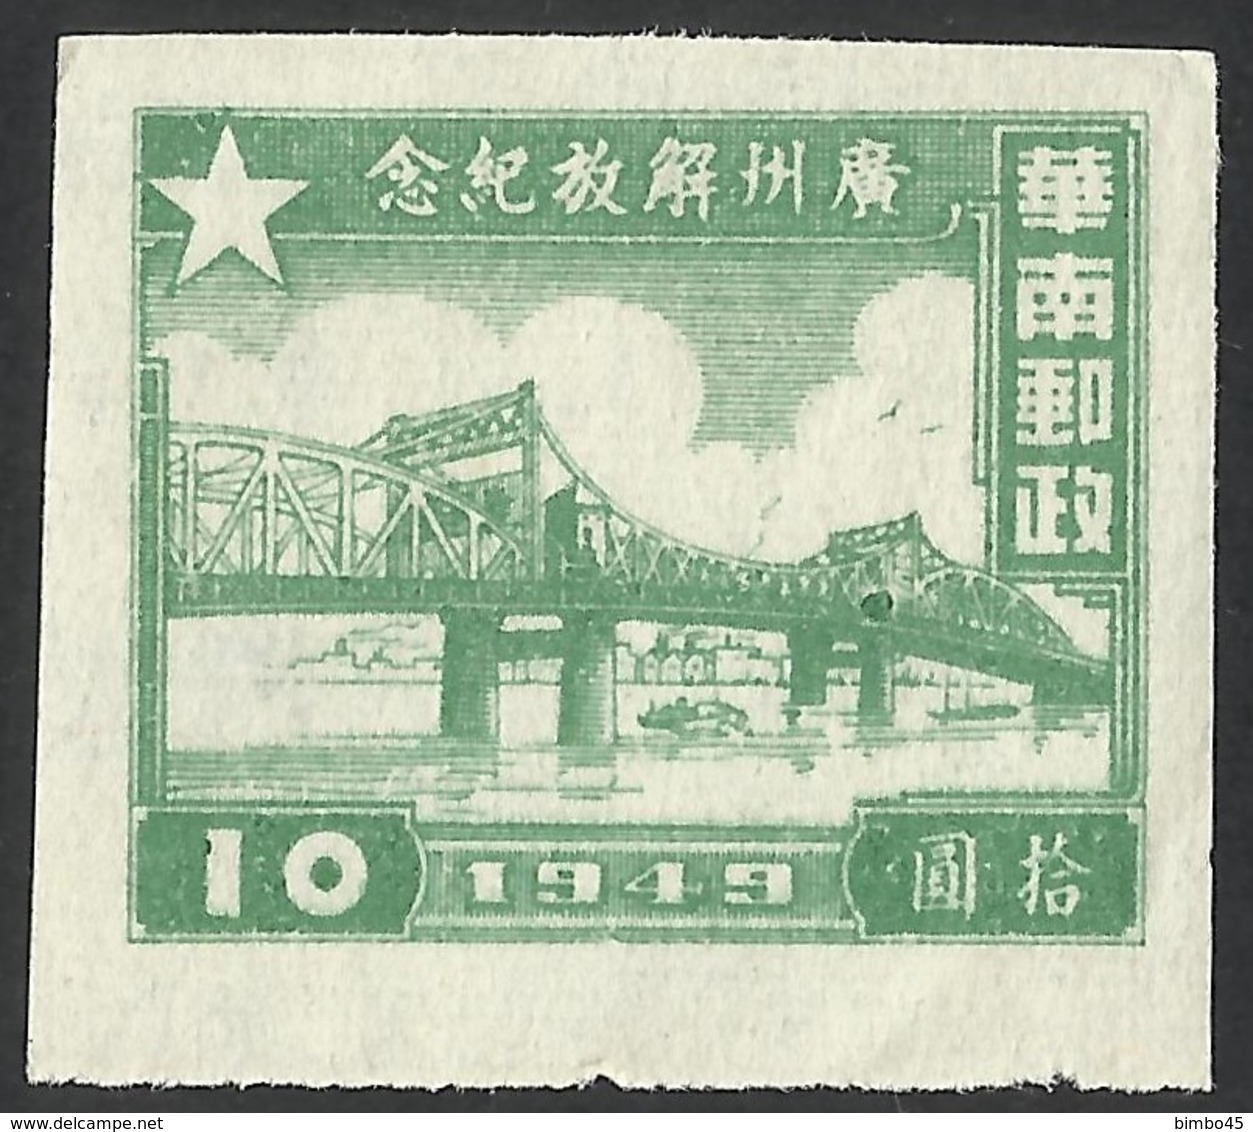 ERRORS--Southern CHINA 1949 Pearl River Bridge,Canton $10-- Large Green Spots  On The Mark.--MNG-Mint No Gum. - Southern-China 1949-50